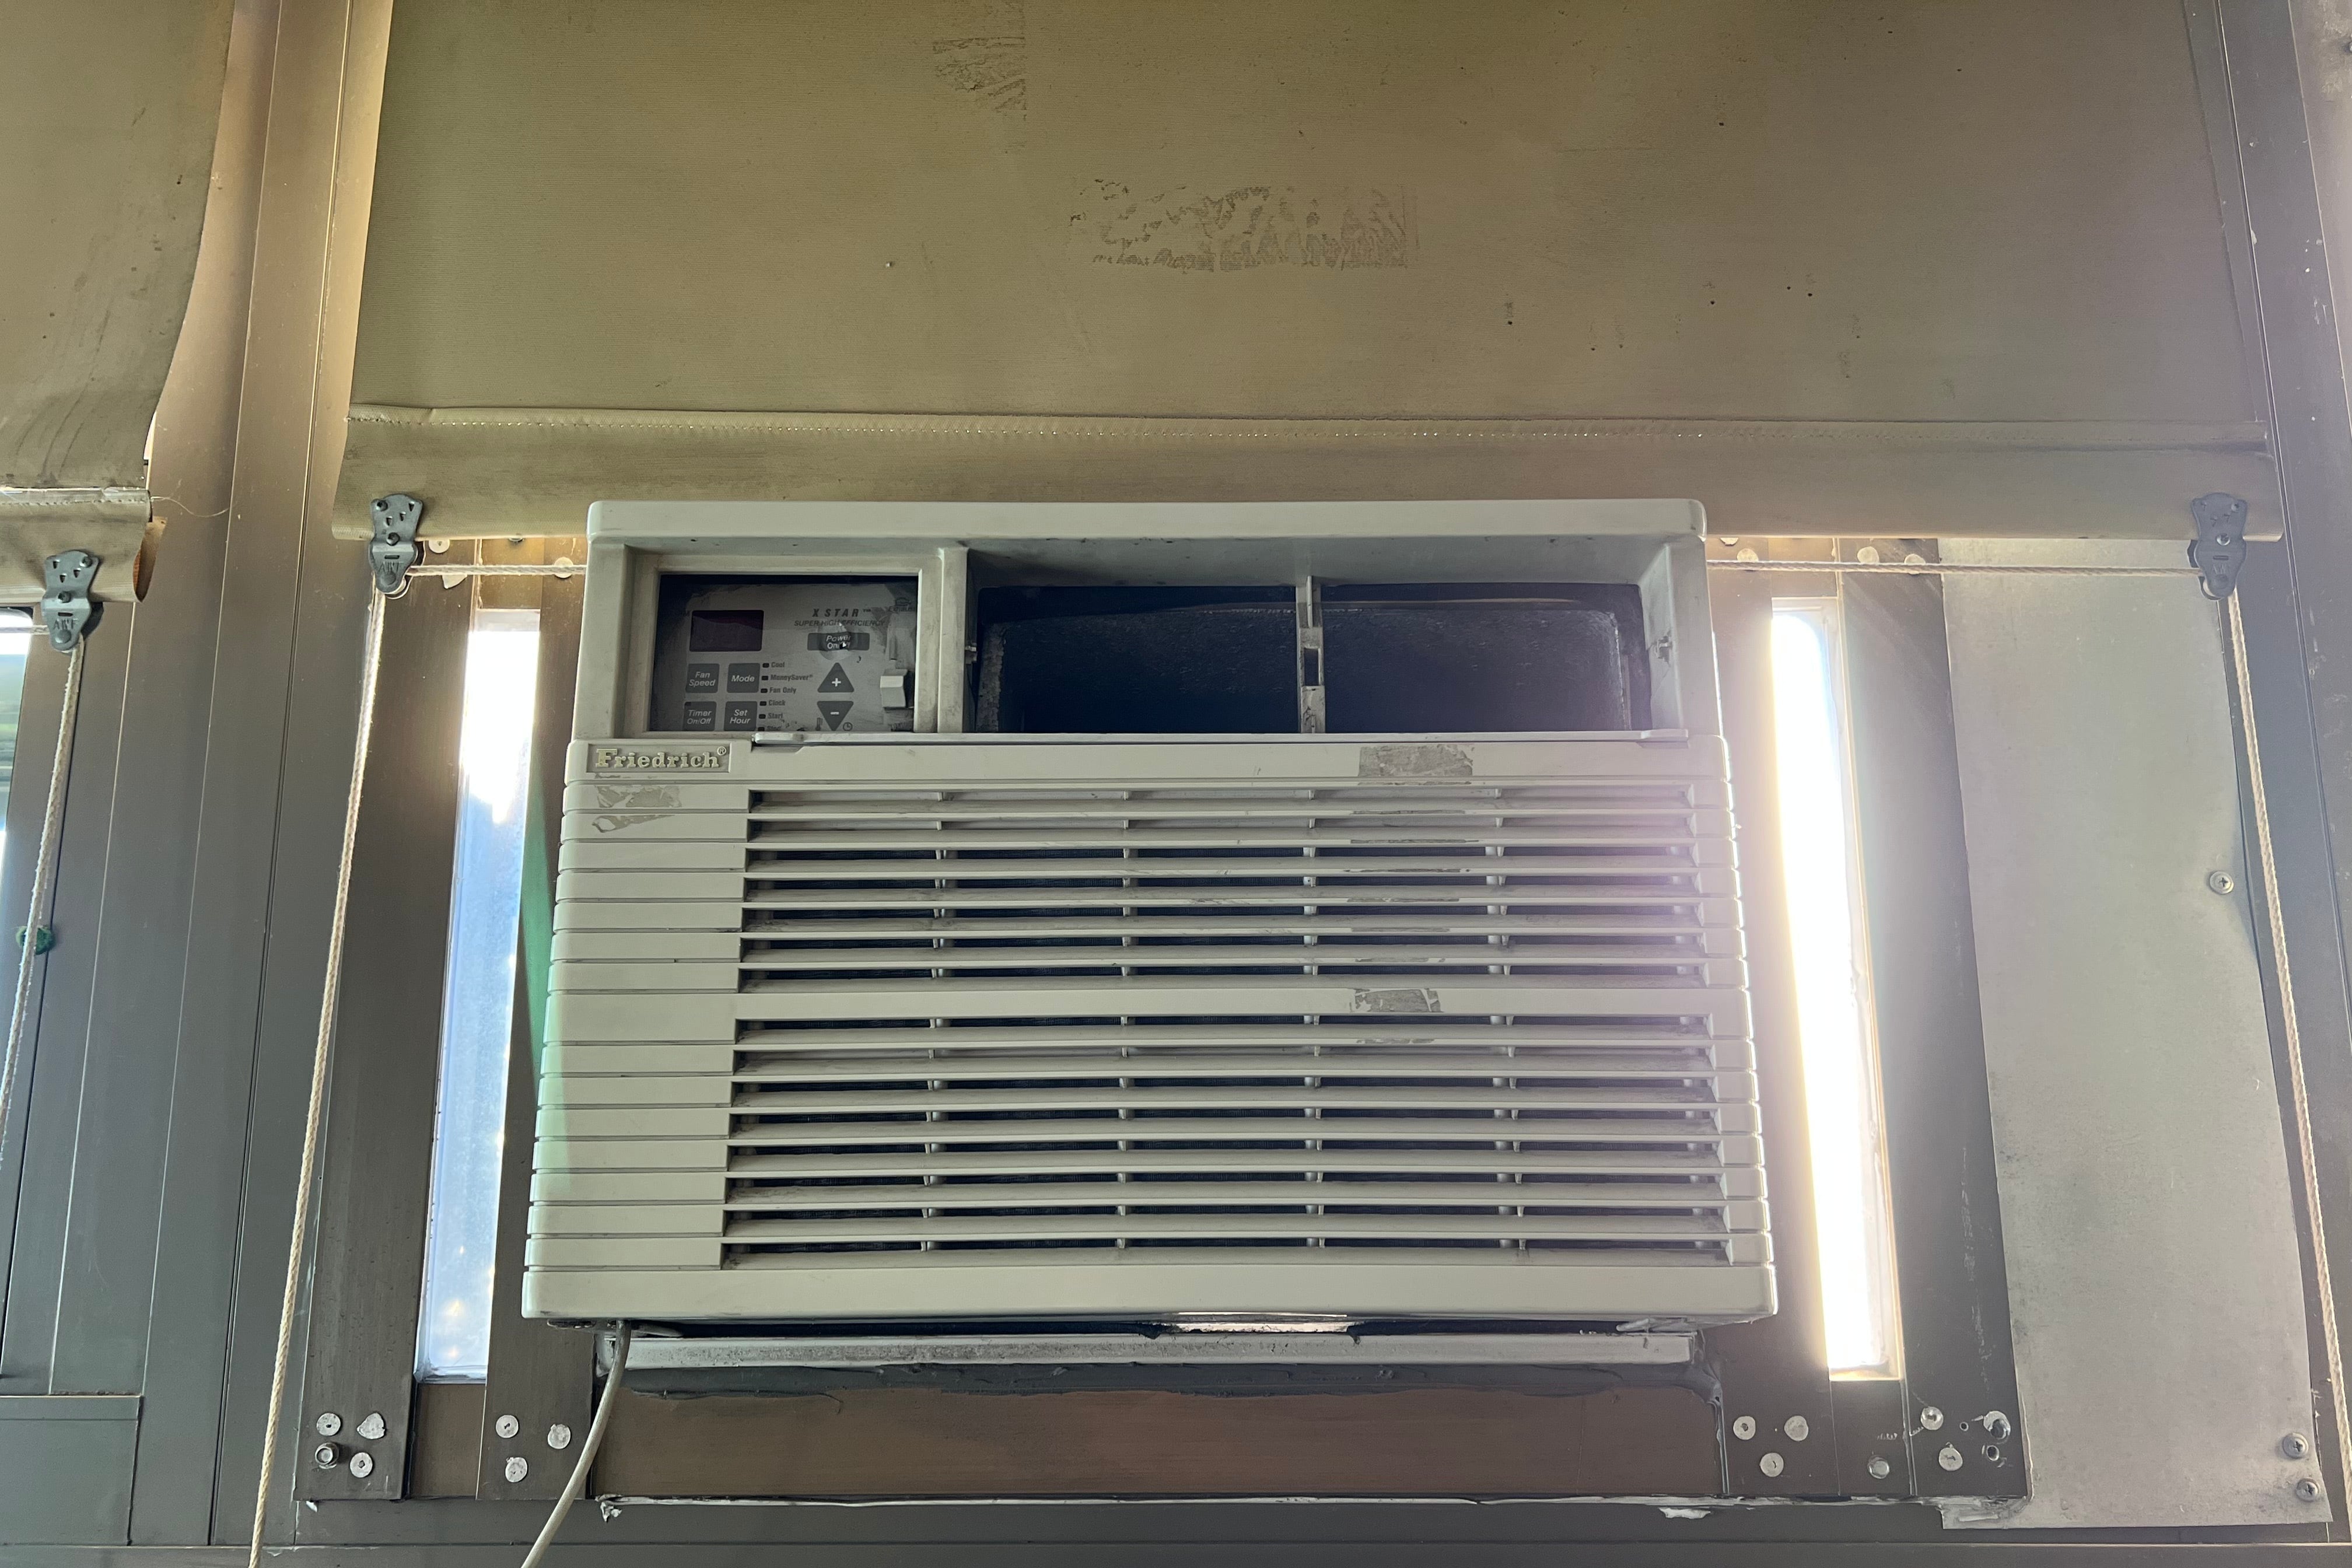 A close up of a wall air conditioning unit.